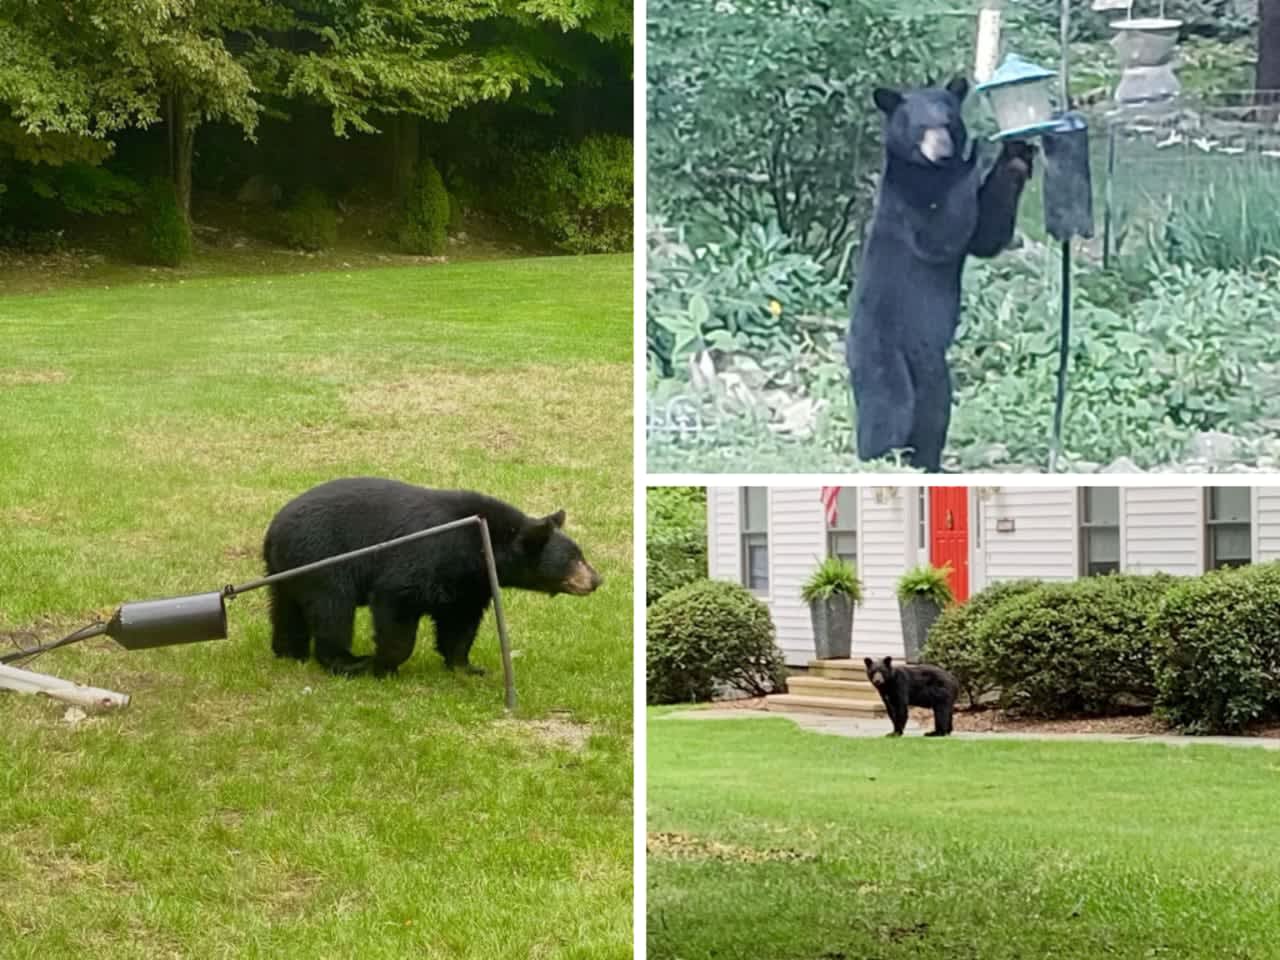 Police released photos of earlier black bear encounters in New Canaan. The animals often look for food in bird feeders.